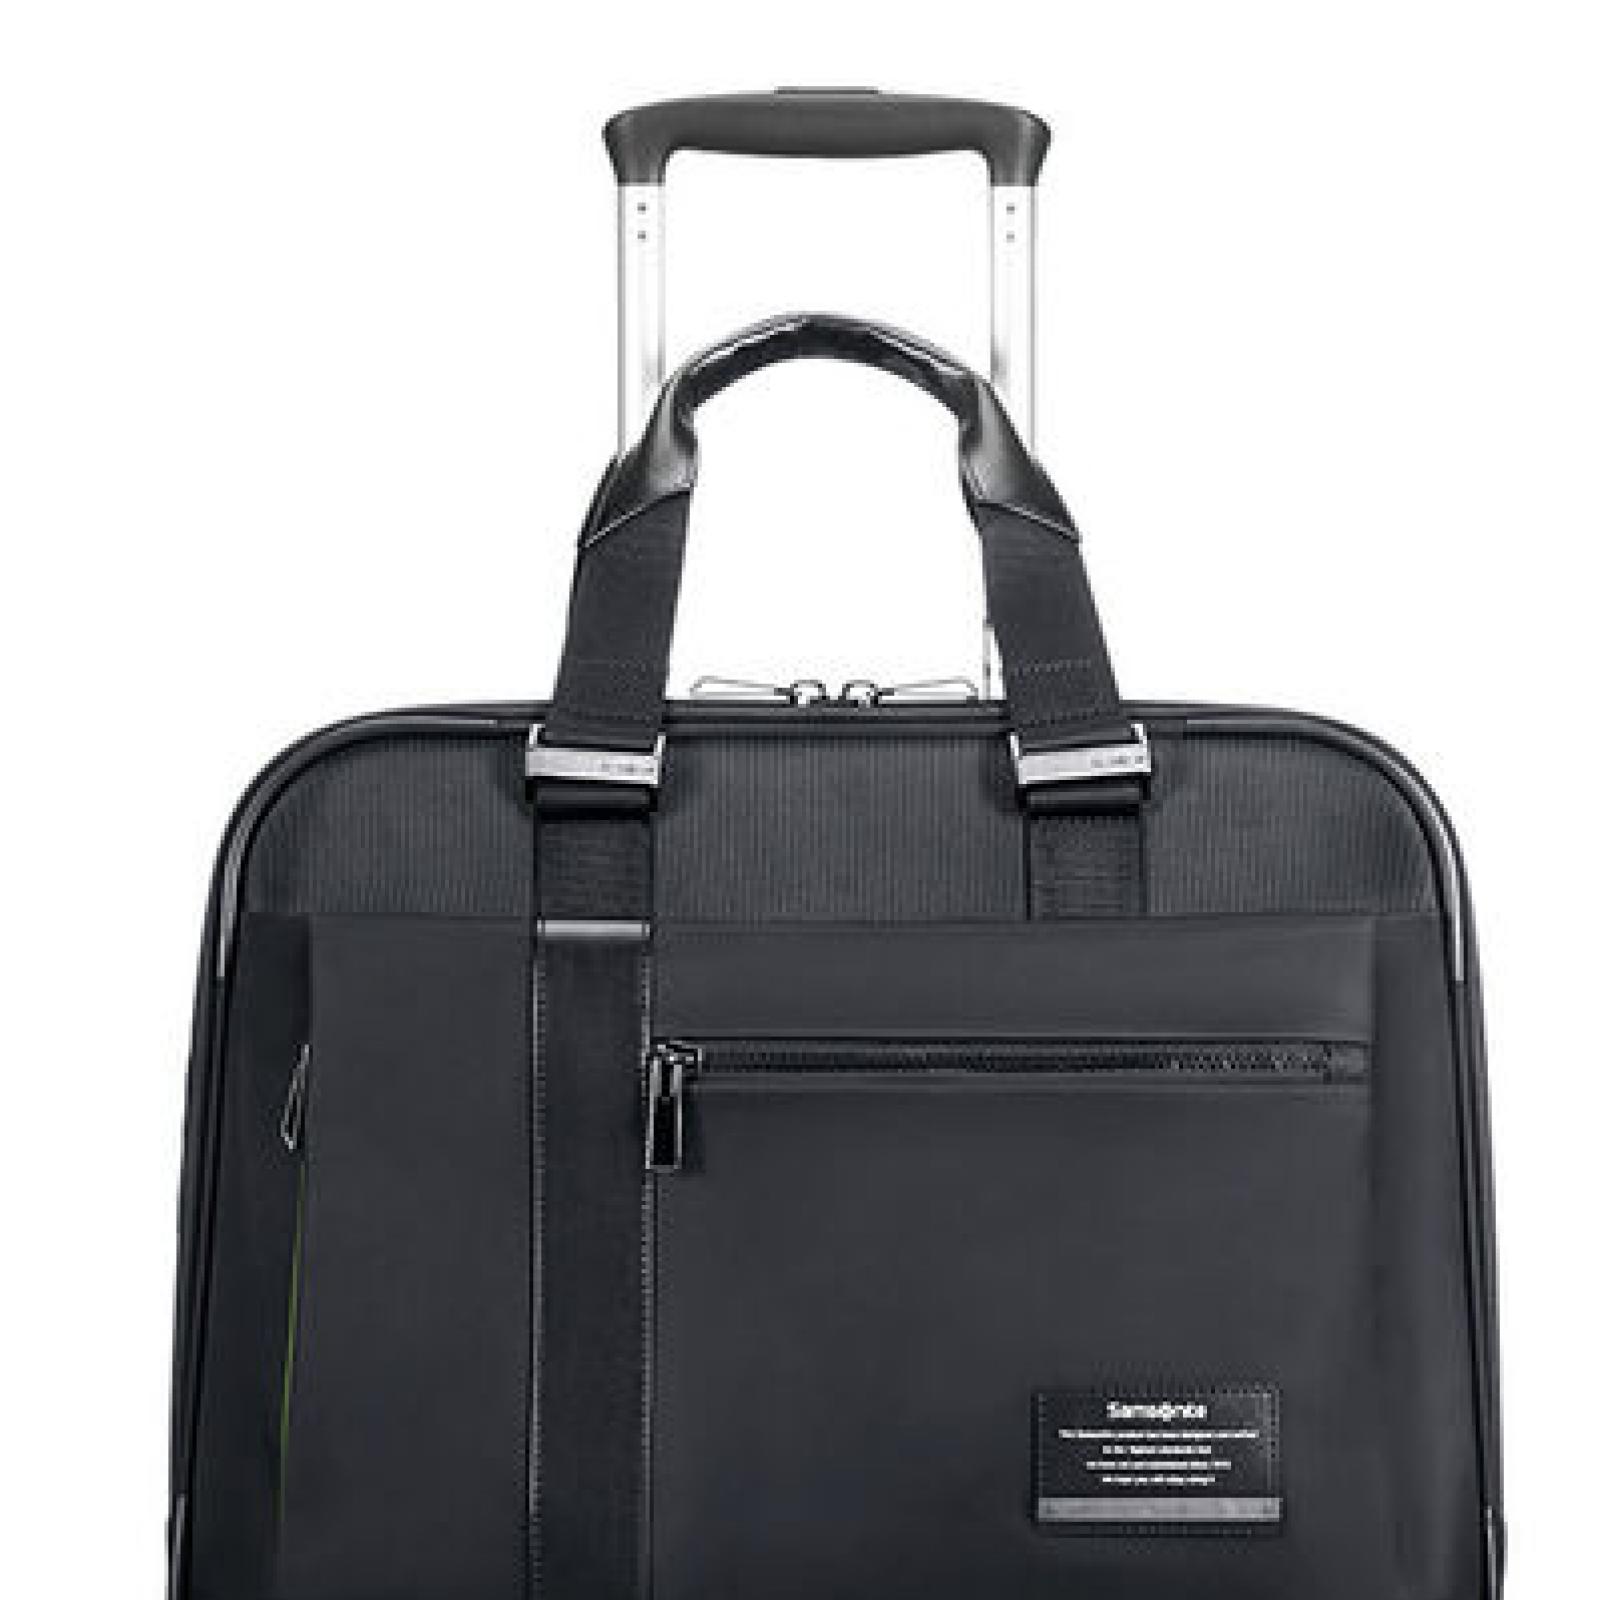 Samsonite Computer Briefcase with wheels Openroad 16.4 - 1